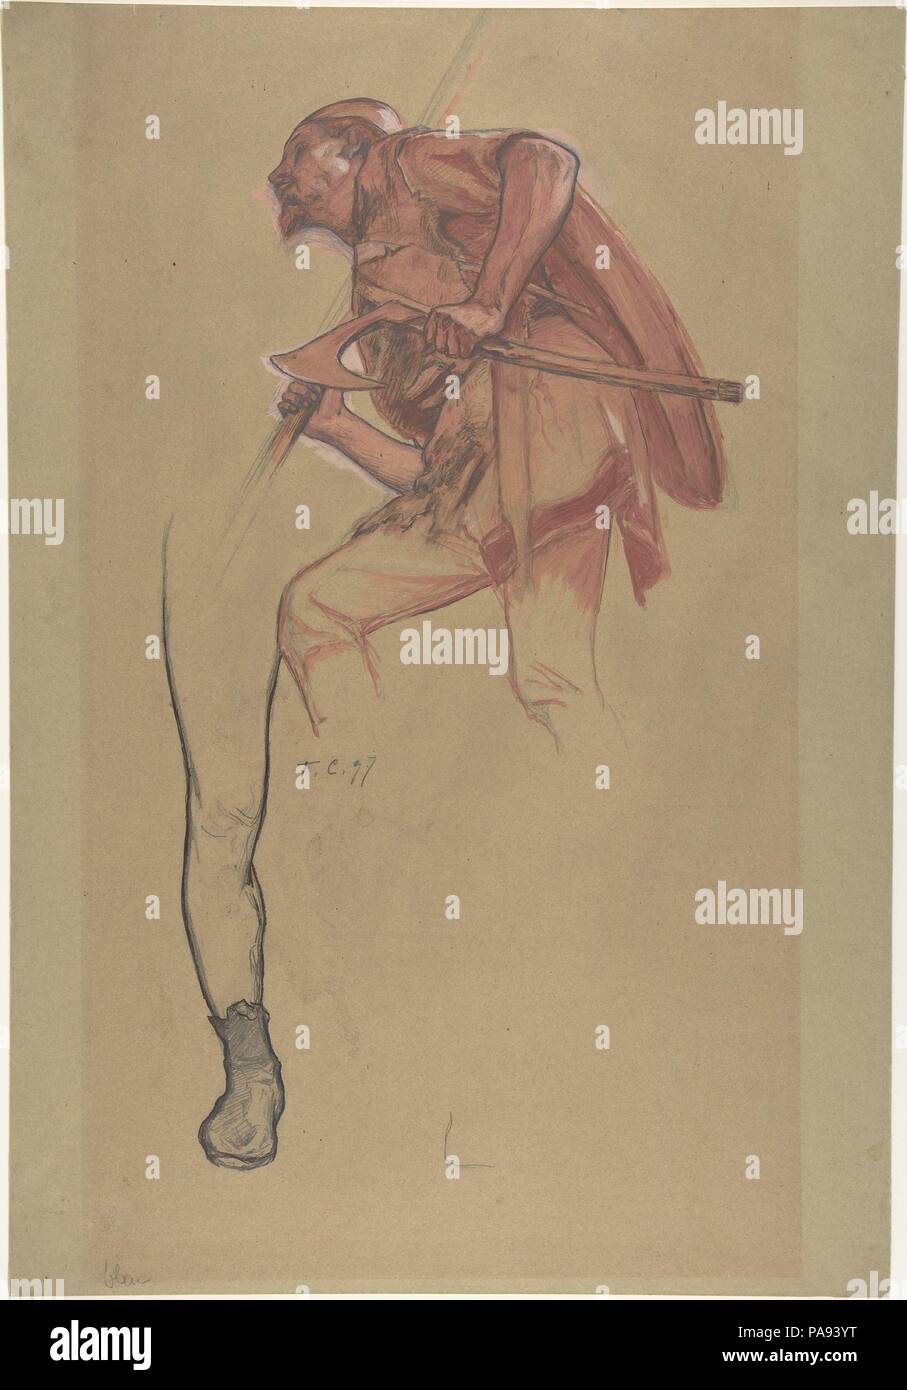 Warrior with an Axe and Study of a Leg. Artist: Fernand Cormon (French, Paris 1854-1924 Paris). Dimensions: Sheet: 20 x 13 13/16 in. (50.8 x 35.1cm). Date: 1897. Museum: Metropolitan Museum of Art, New York, USA. Stock Photo